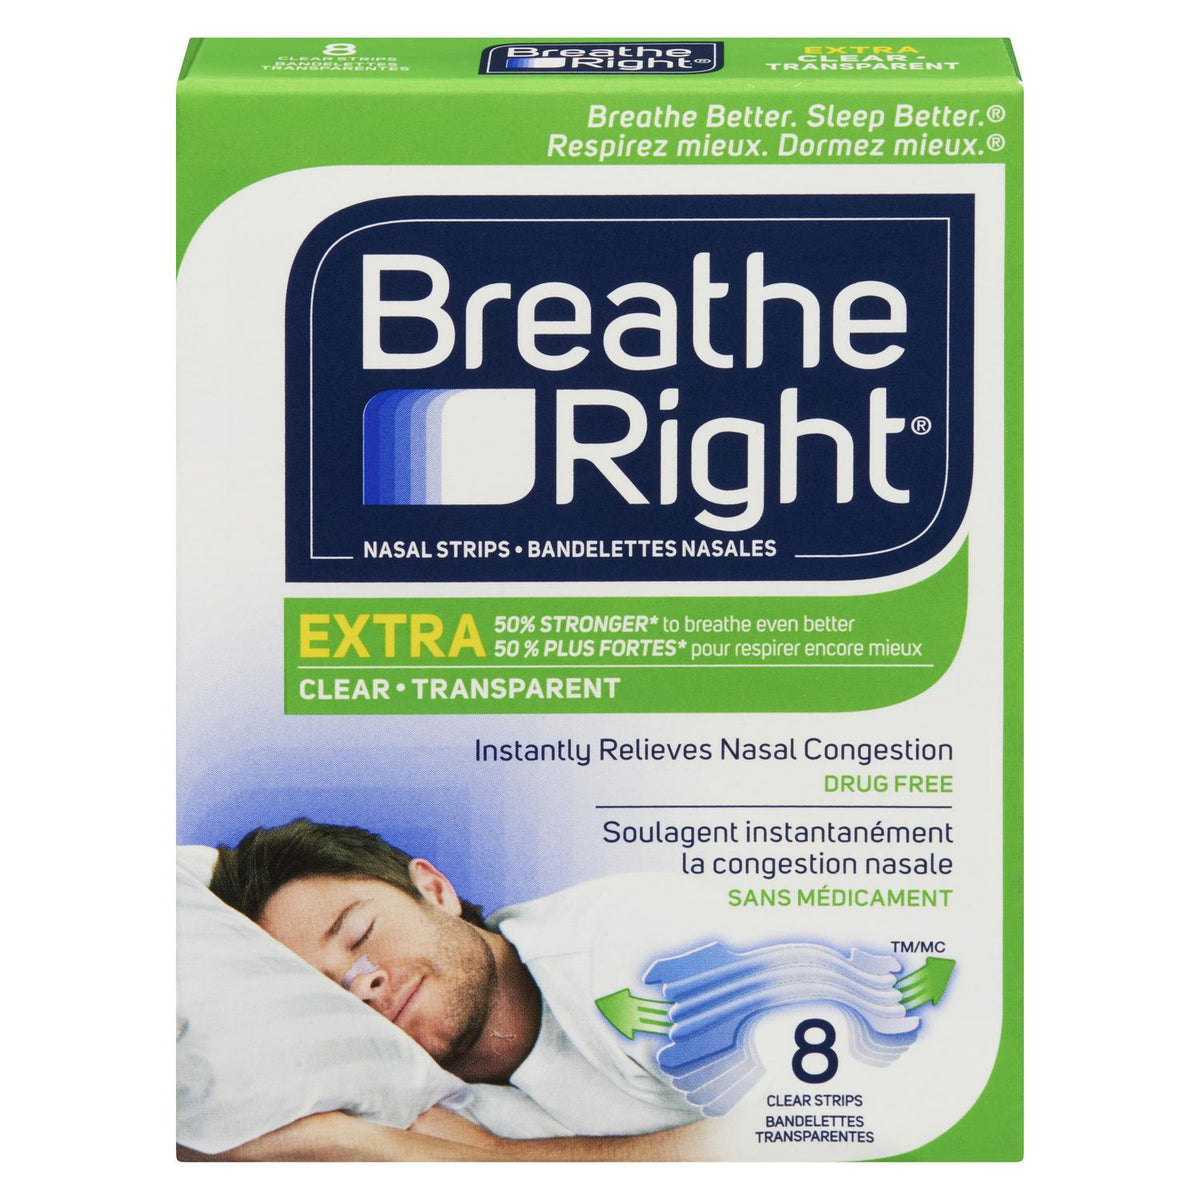 Breathe Right Nasal Strips Clear, Extra Strong | Instantly relieves nasal congestion | Drug Free